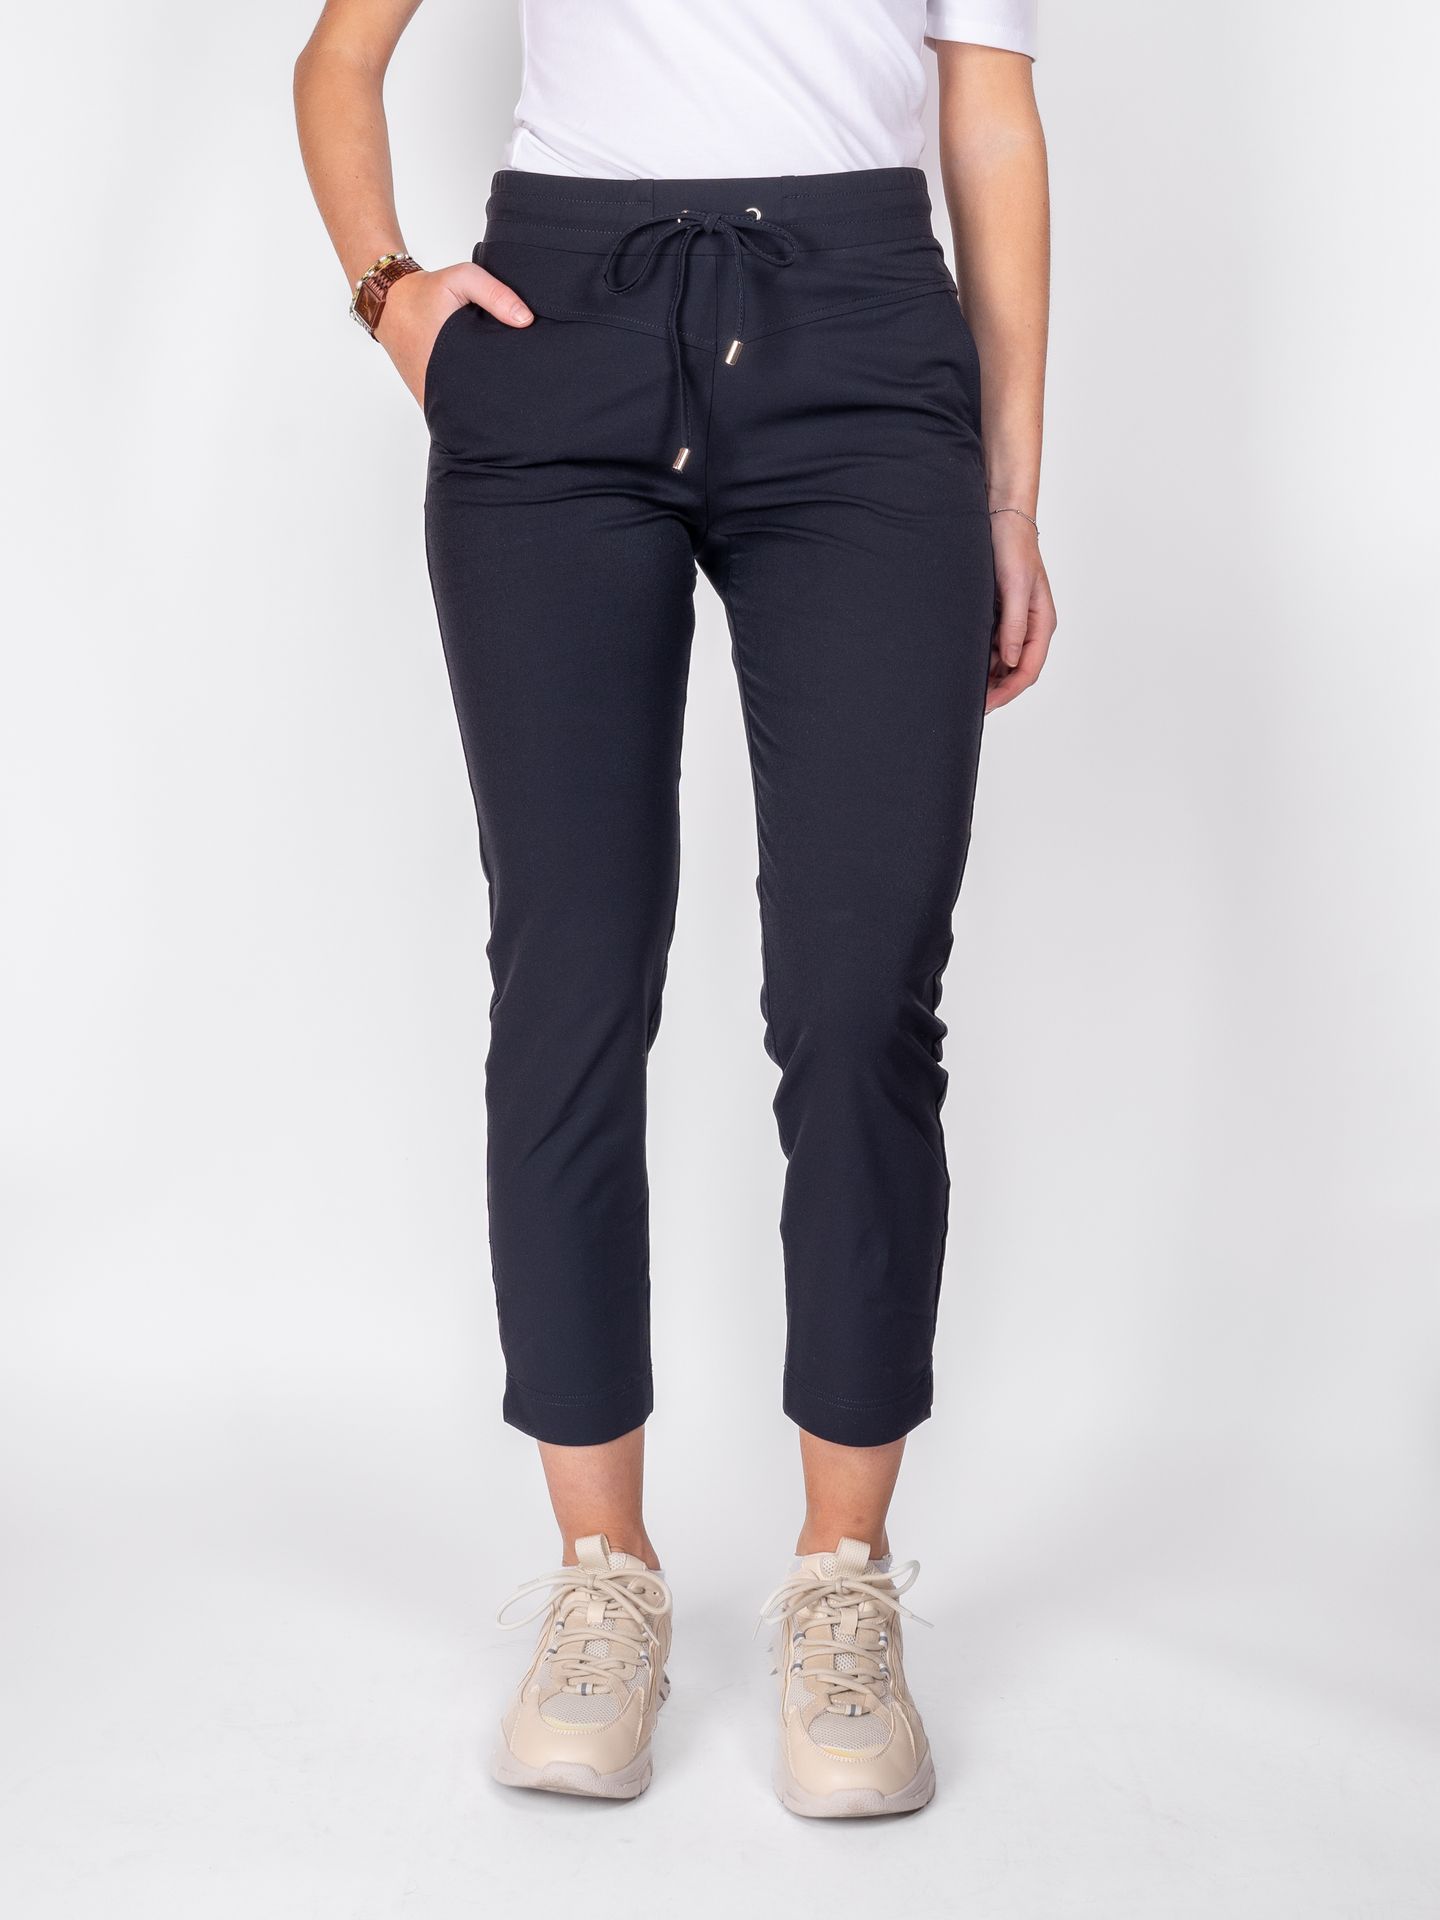 &Co Woman PAGE 7/8 TRAVEL 00700 b-navy basic 2900146532039